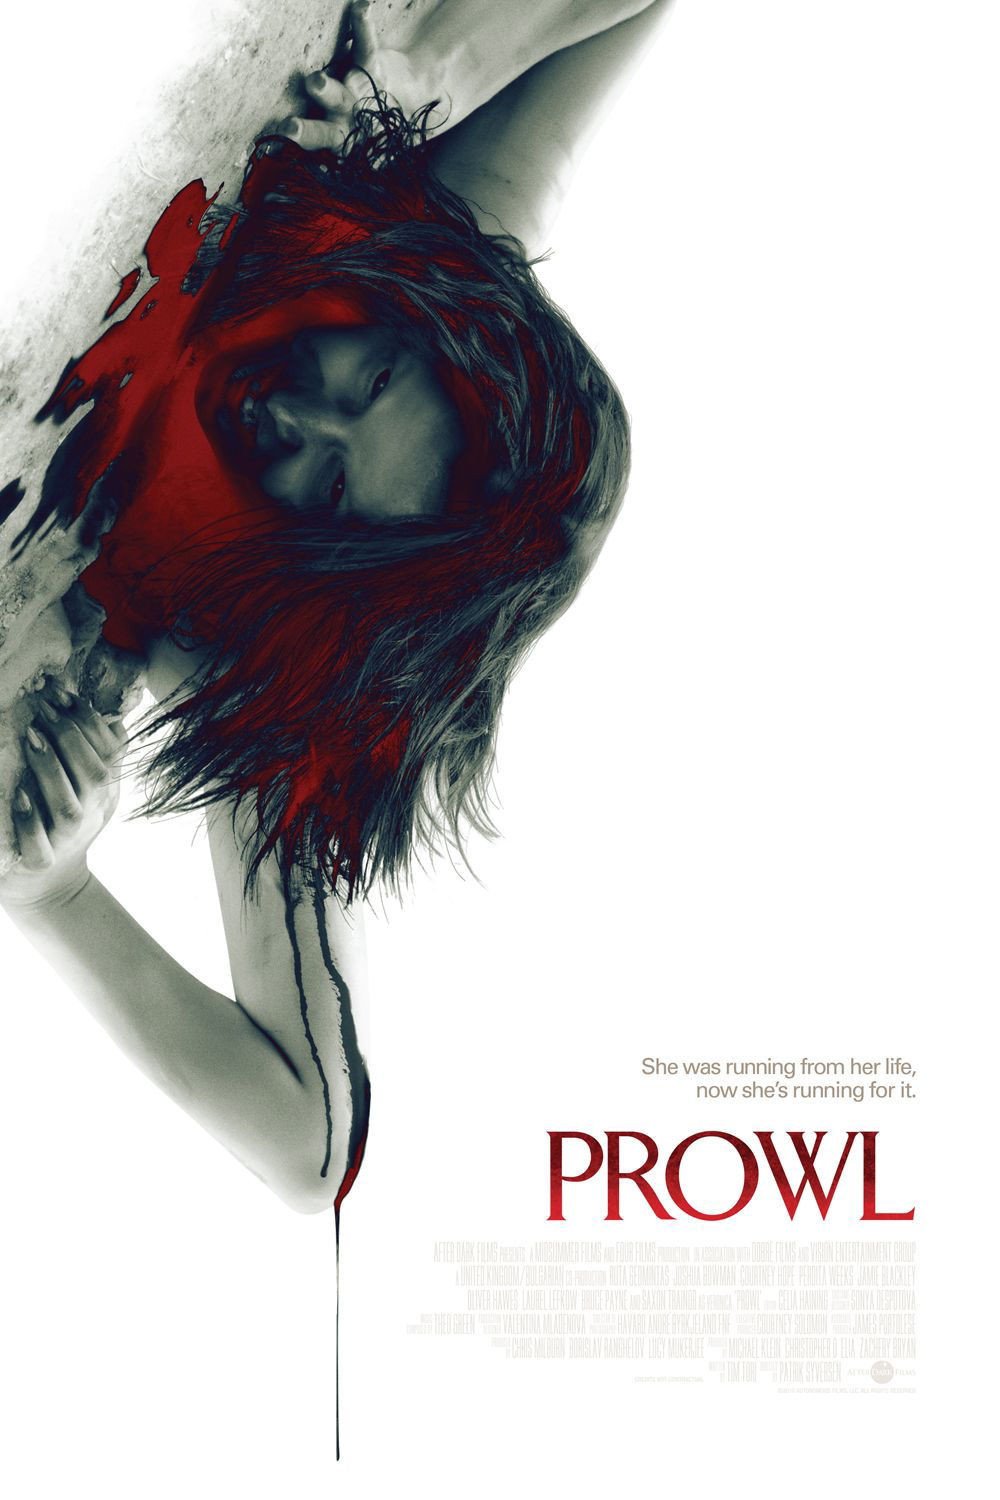 Poster for the movie "Prowl"